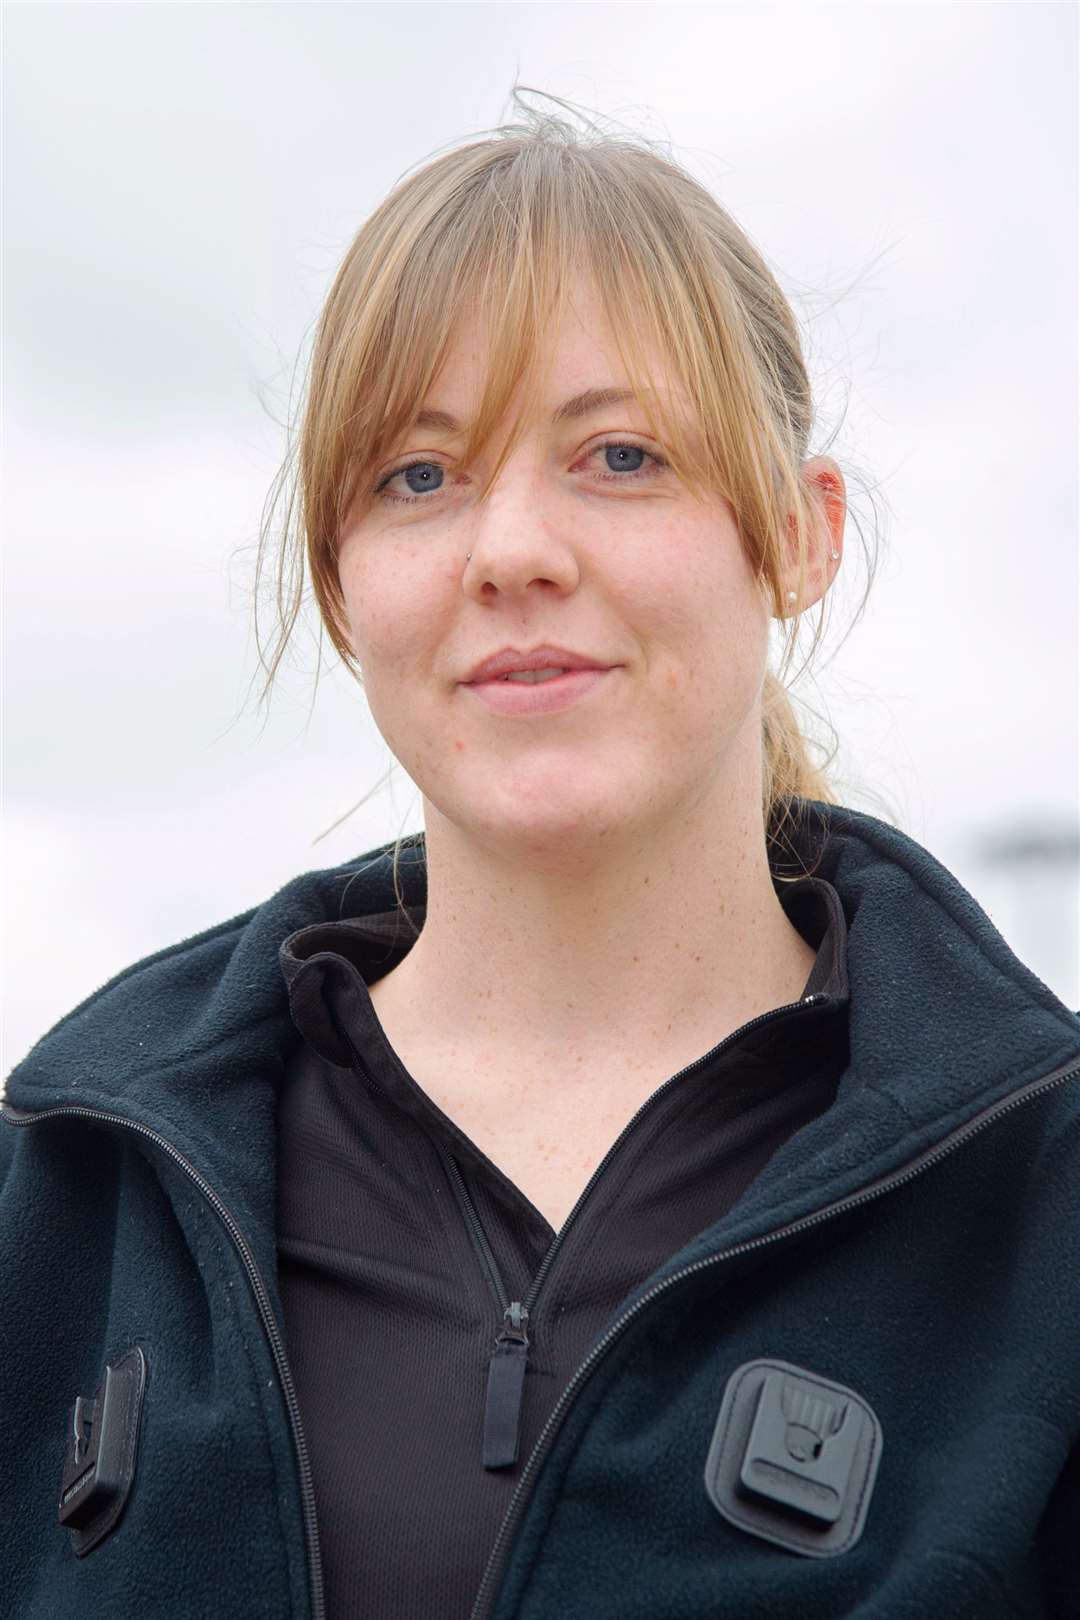 Police Community Officer Rachel Barclay. Picture: Daniel Forsyth